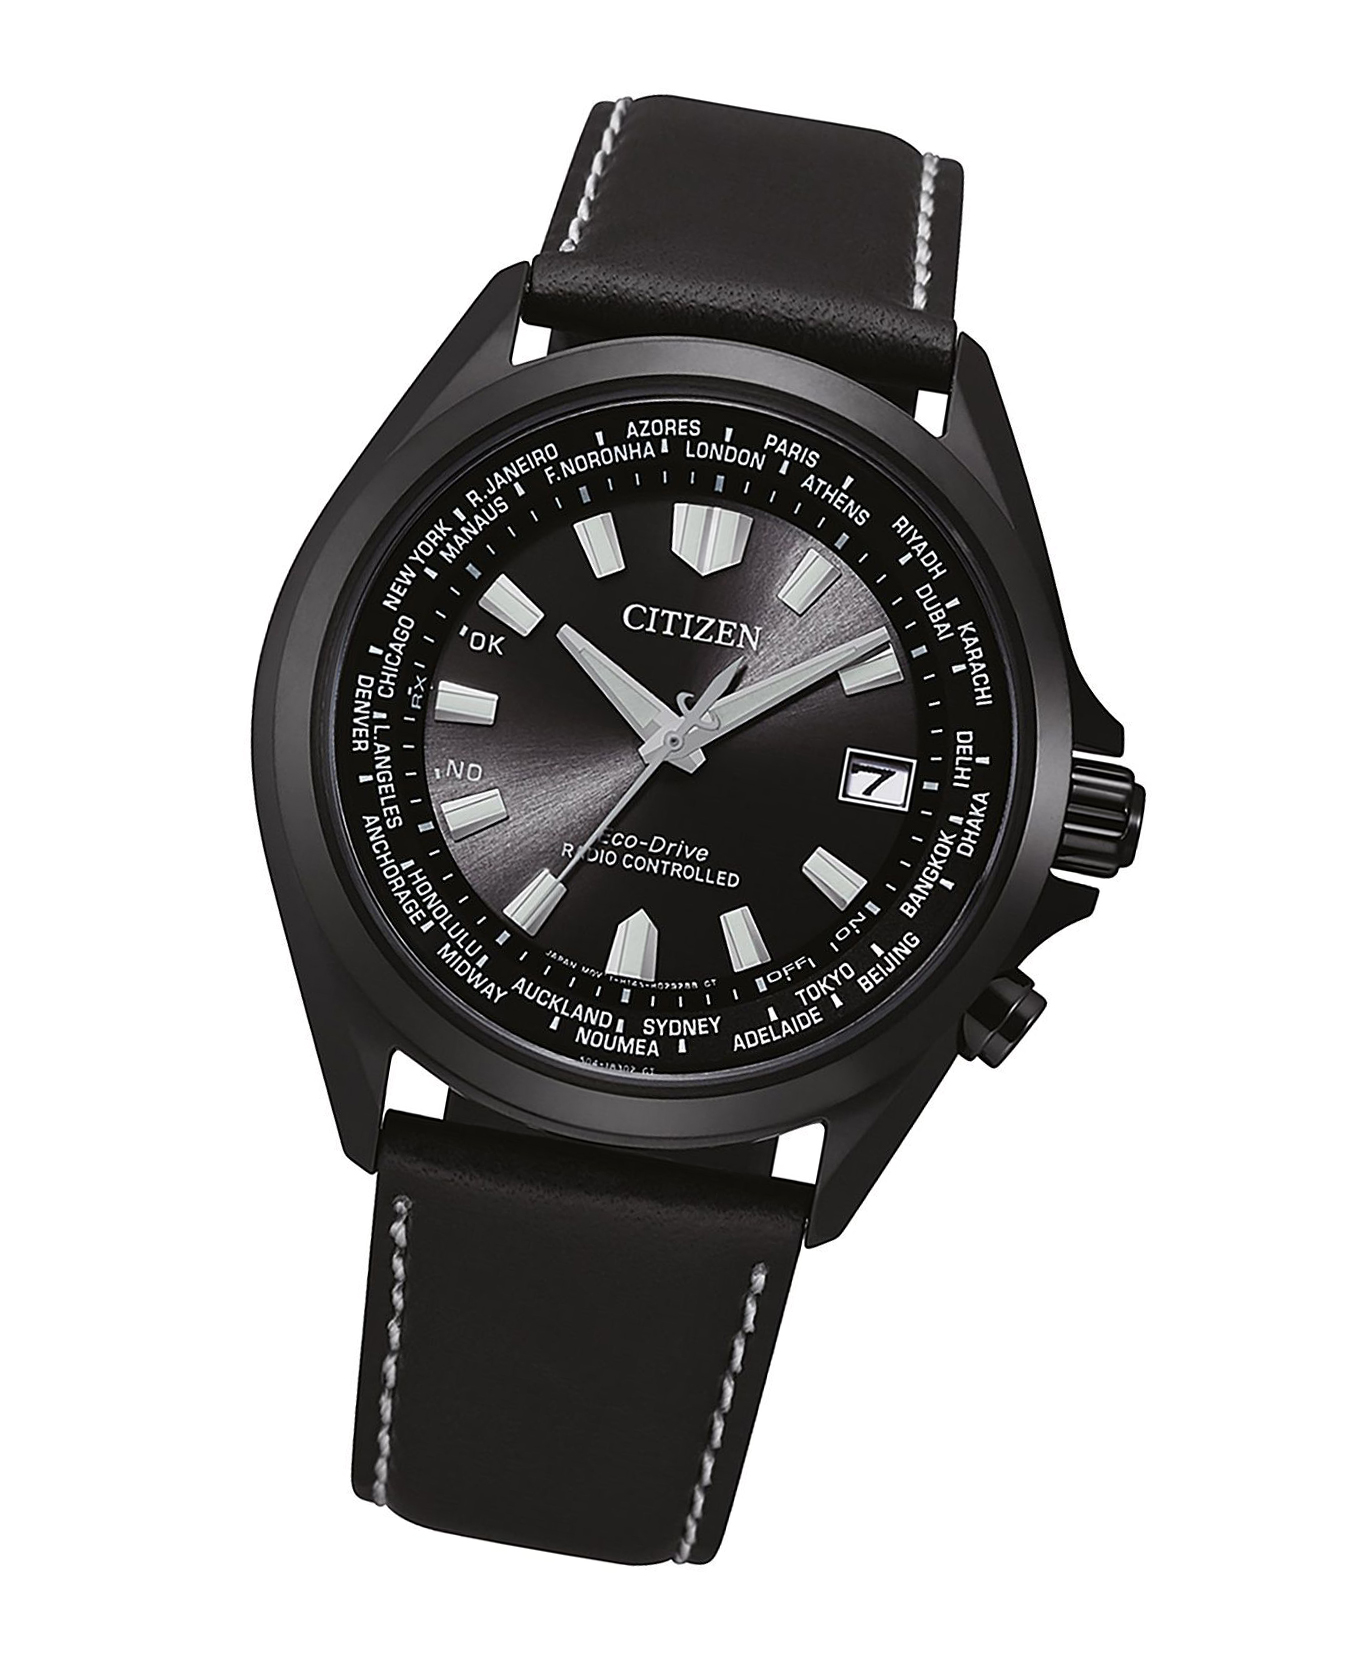 Citizen Eco Drive Radio Controlled -15%gespart!* 